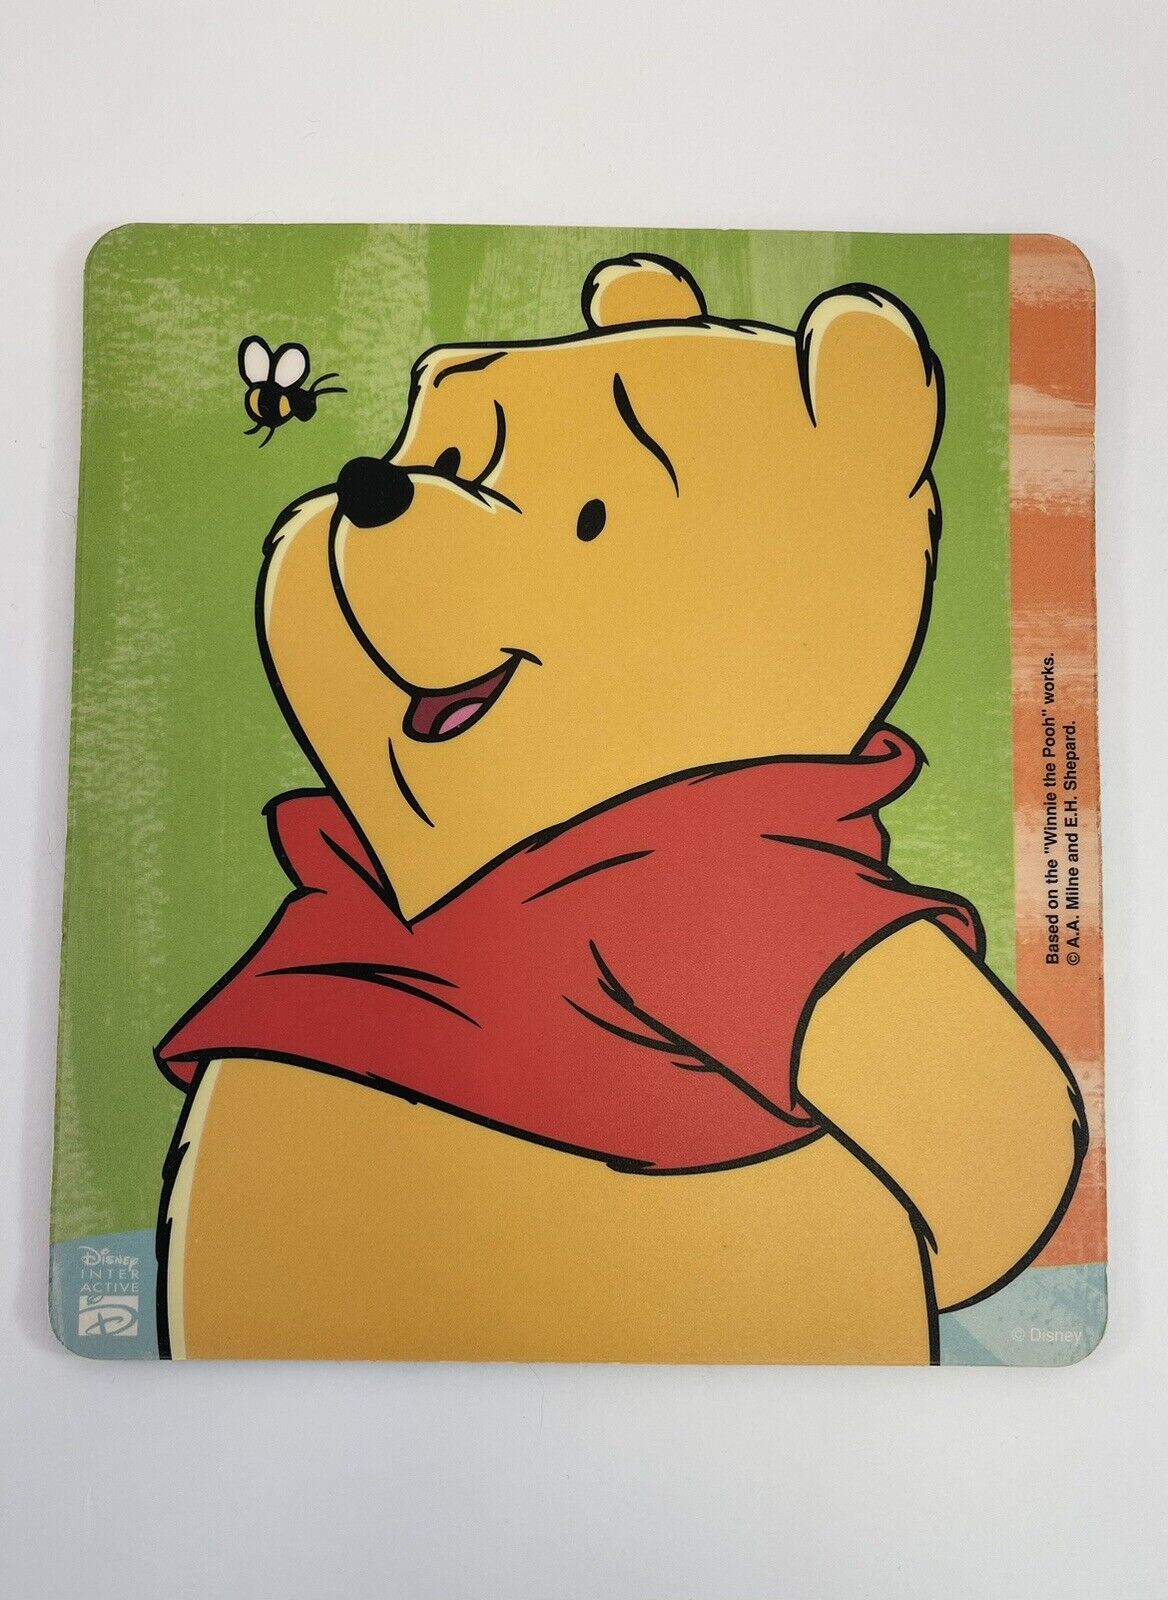 Disney Winnie the Pooh Interactive Mouse Pad - Pooh Mousepad - Mousepad Only